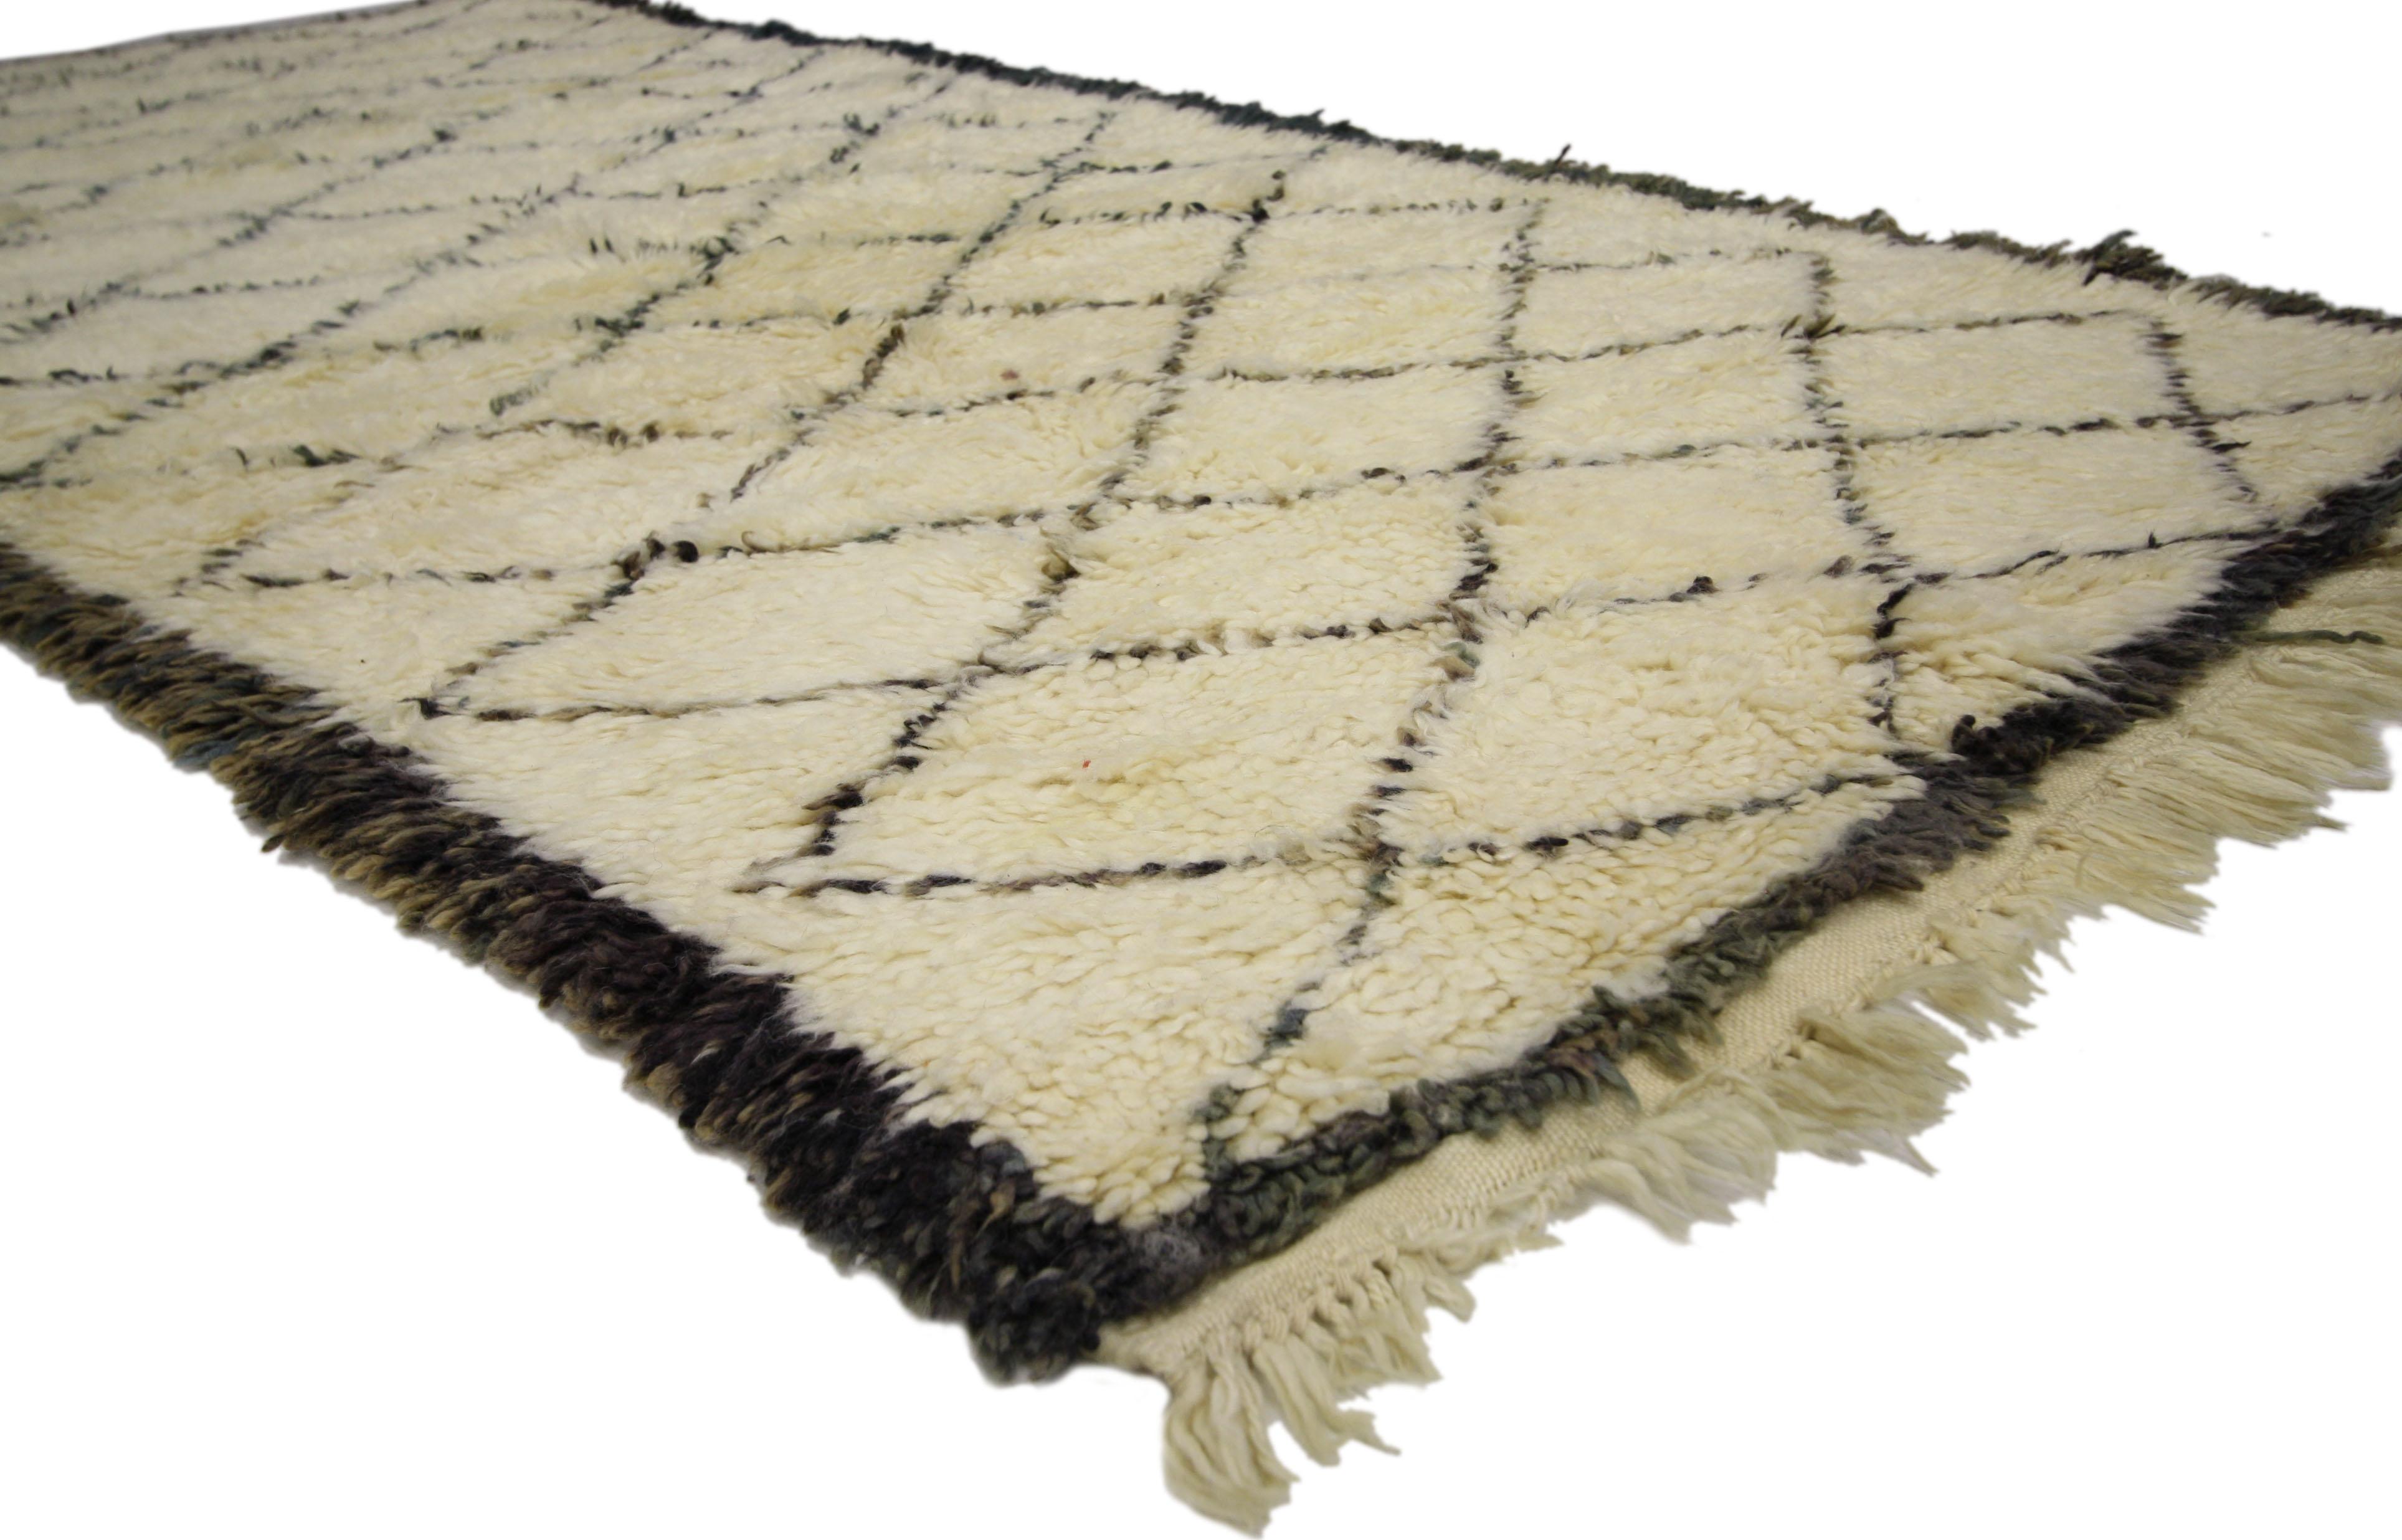 20659 Vintage Beni Ourain Moroccan rug, Berber Moroccan rug 04'02 x 08'04. This hand-knotted wool vintage Beni Ourain Moroccan rug features a lozenge trellis pattern on a neutral background. Bold lines unite to form an all-over diamond pattern on a